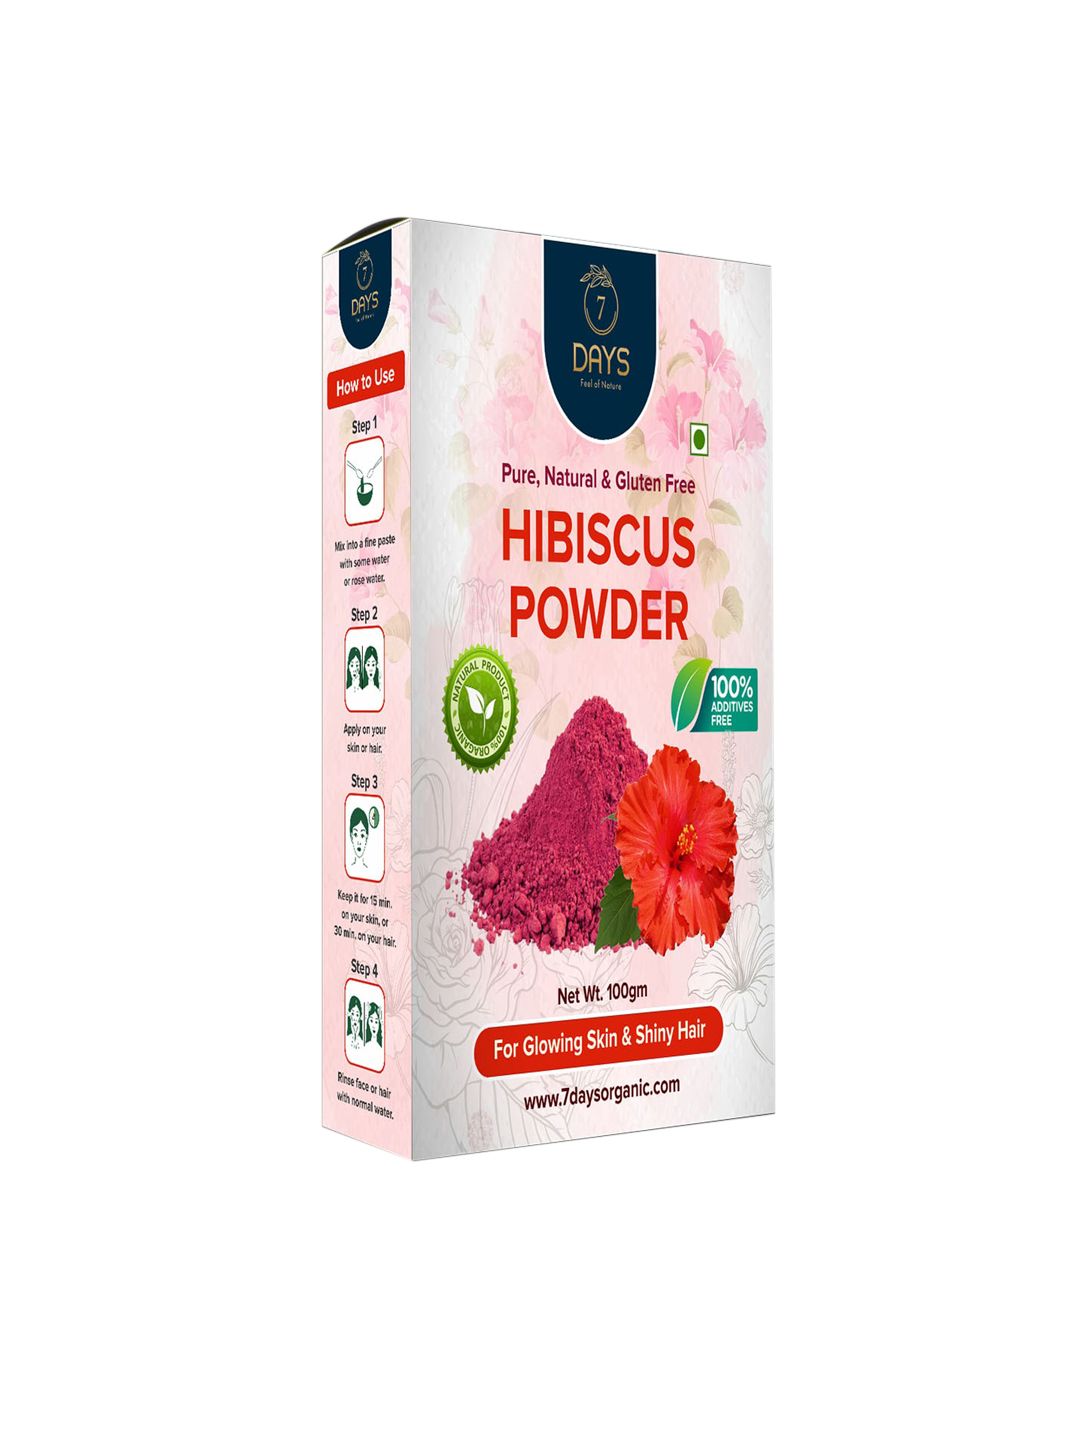 7 DAYS 100% Natural & Pure Hibiscus Powder for Shiny Hair & Glowing Skin - 100 g Price in India